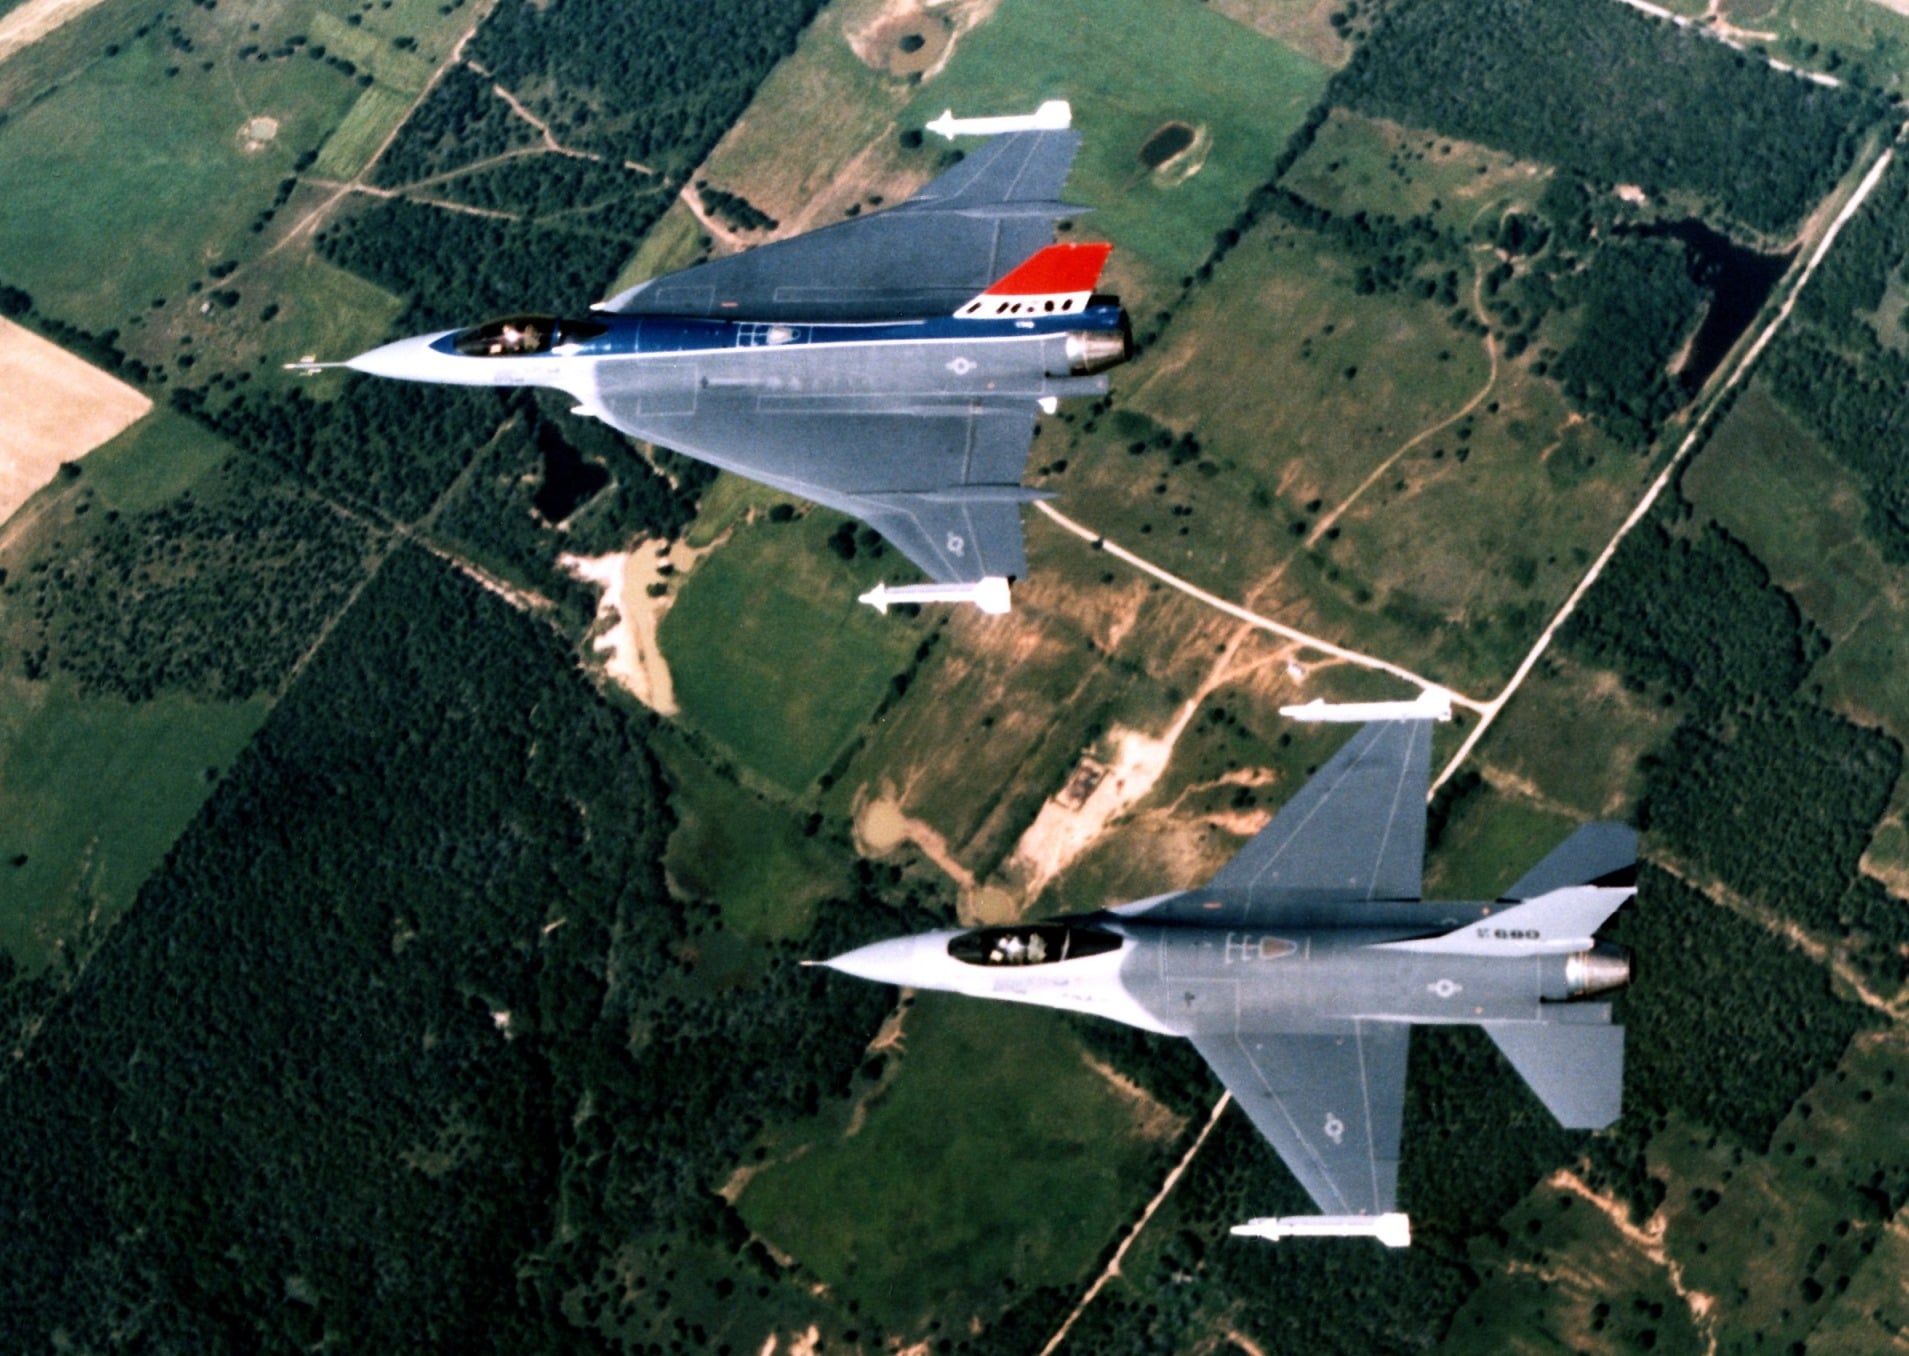 F-16XL and a regular F-16 flying.